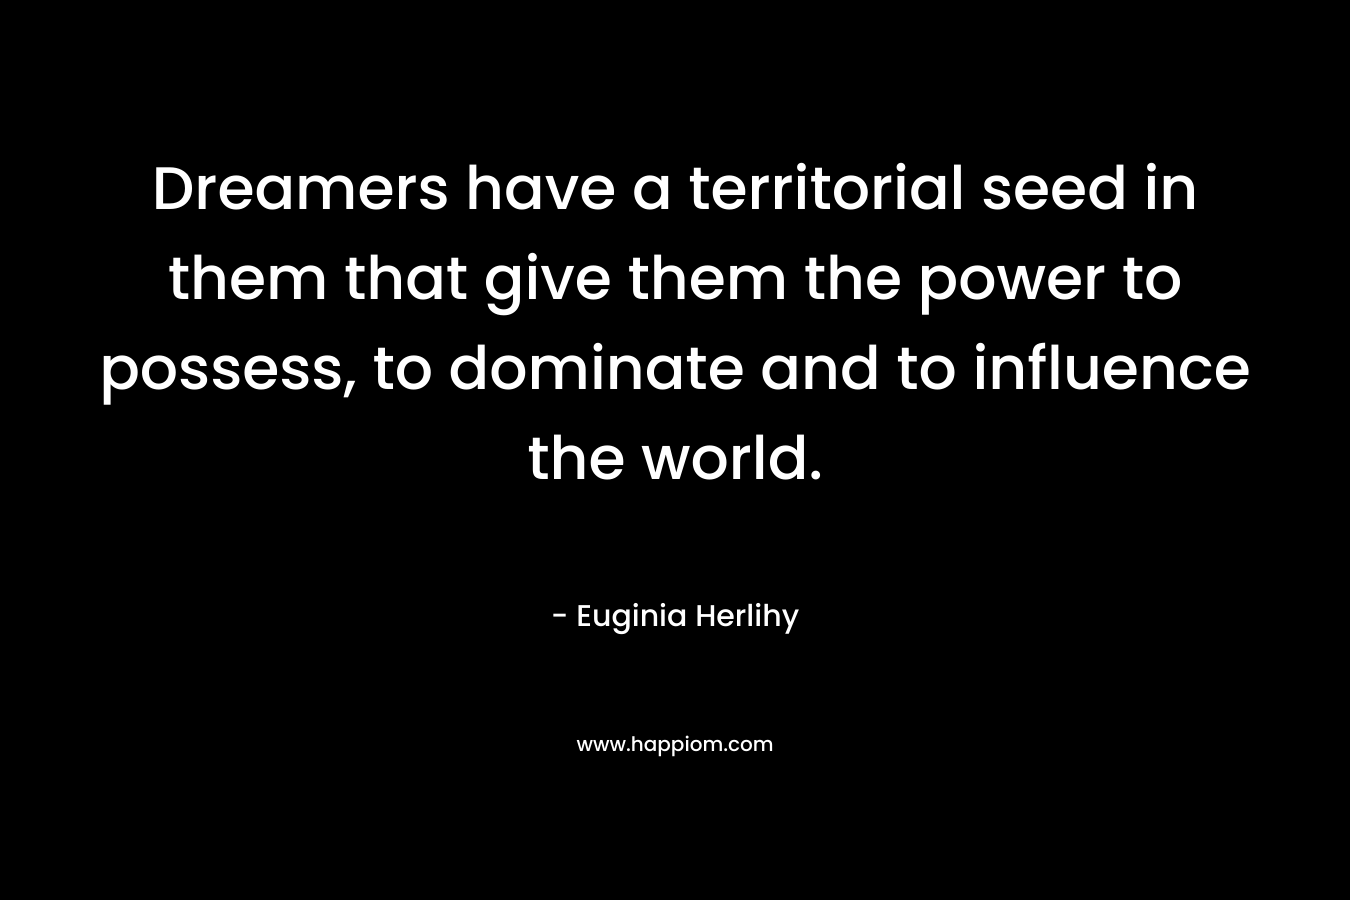 Dreamers have a territorial seed in them that give them the power to possess, to dominate and to influence the world.